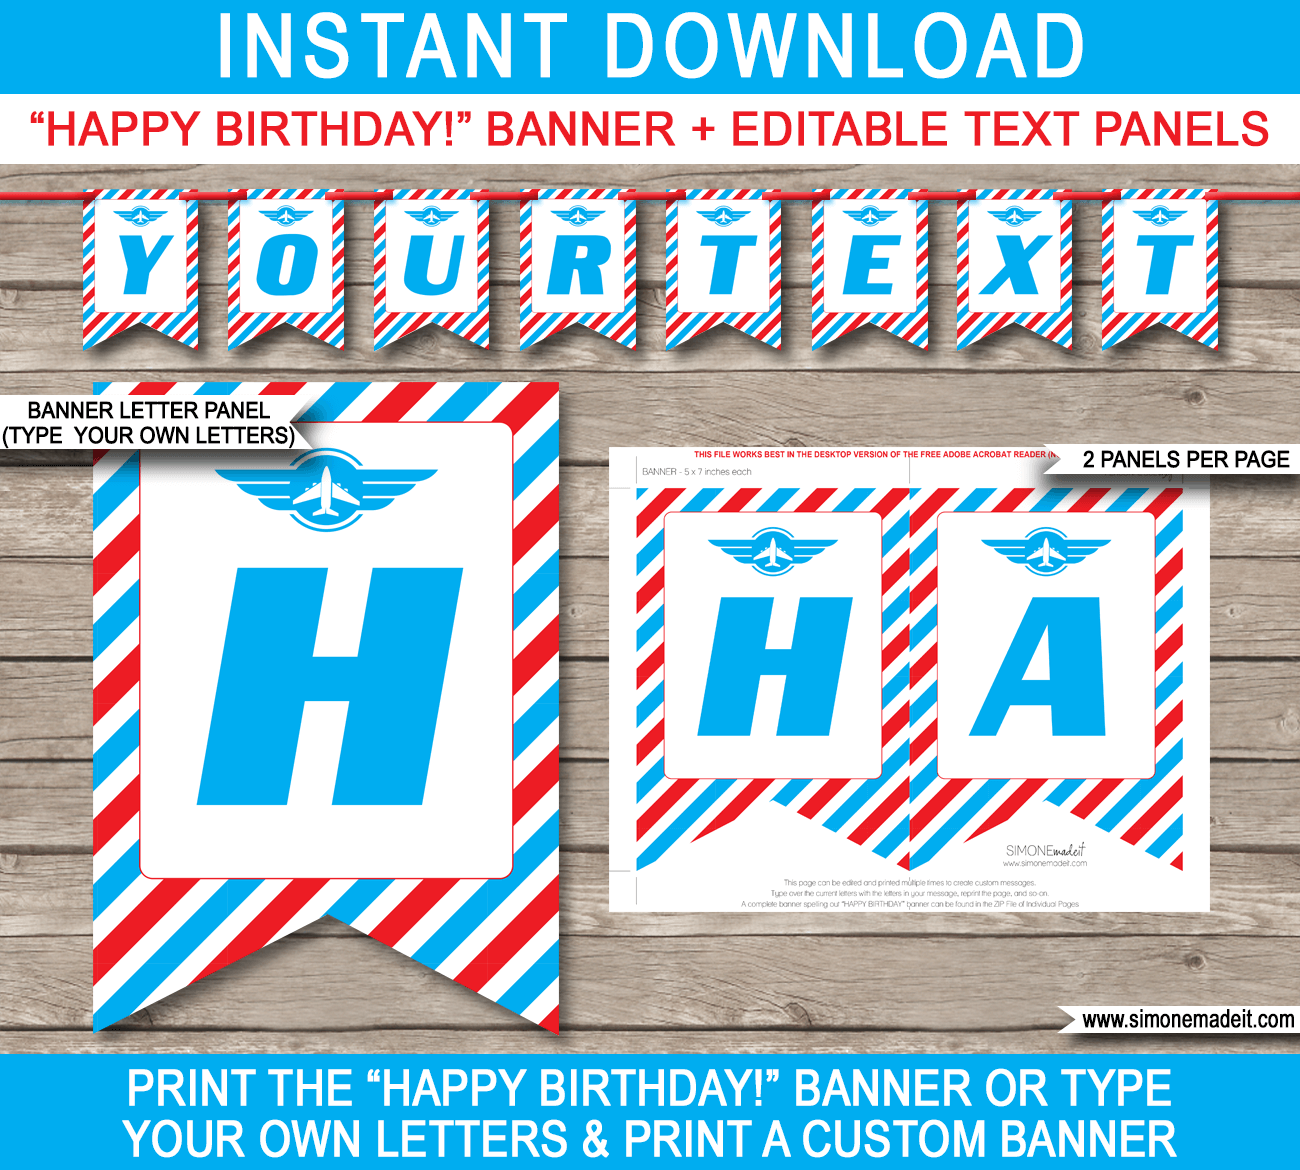 Airplane Birthday Party Banner Template - Bunting - Happy Birthday Banner Pennants - Biplane - Editable and Printable DIY Template - INSTANT DOWNLOAD $4.50 via simonemadeit.com